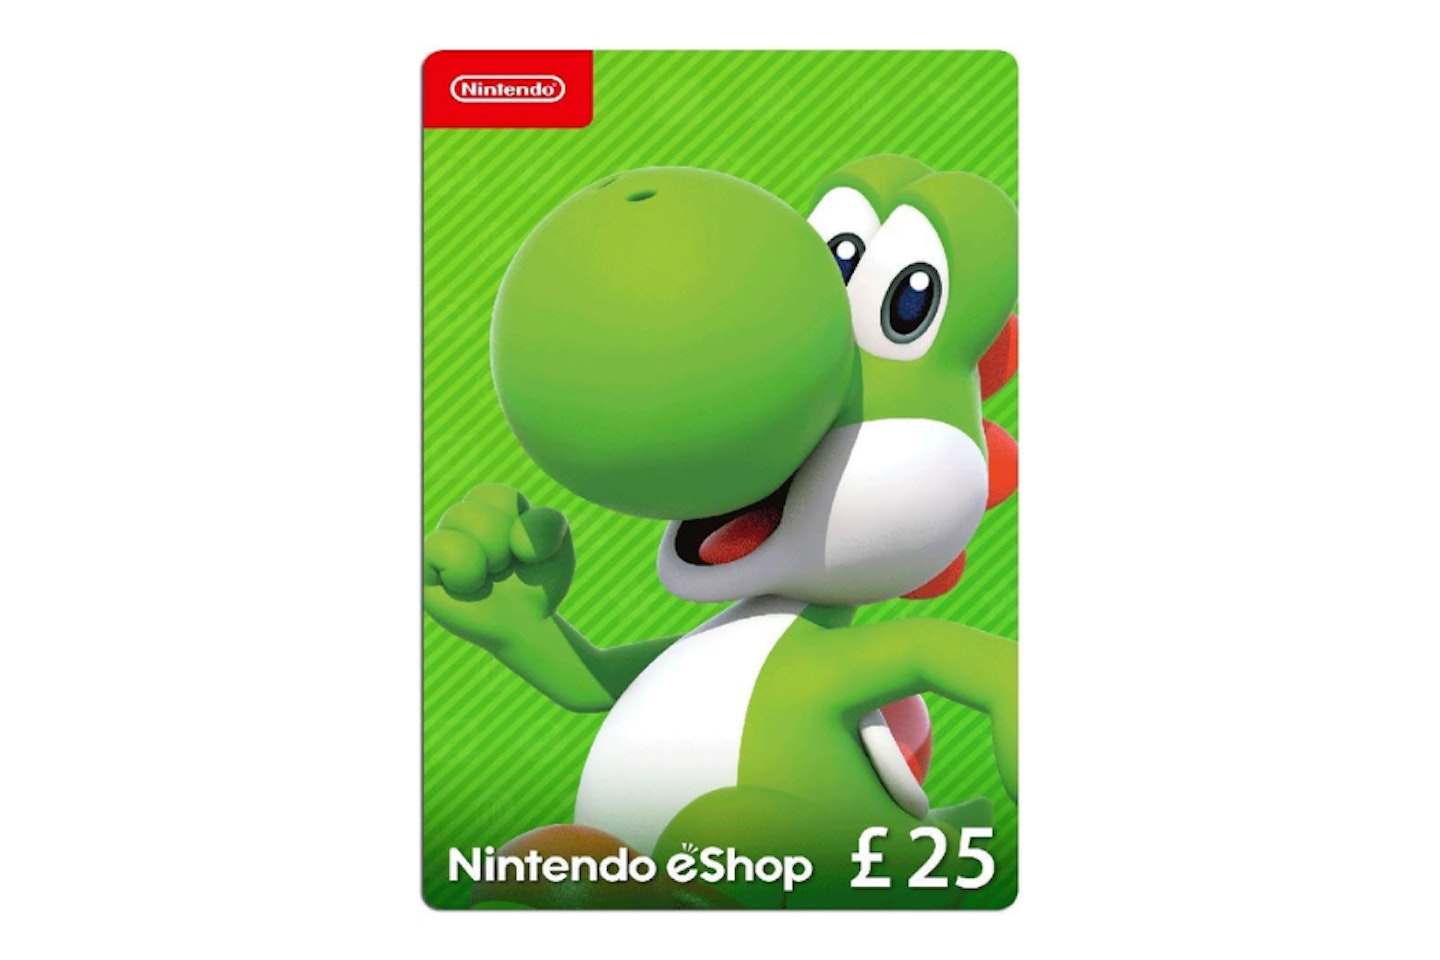 Nintendo eShop Card  - one of the best gifts for gamers